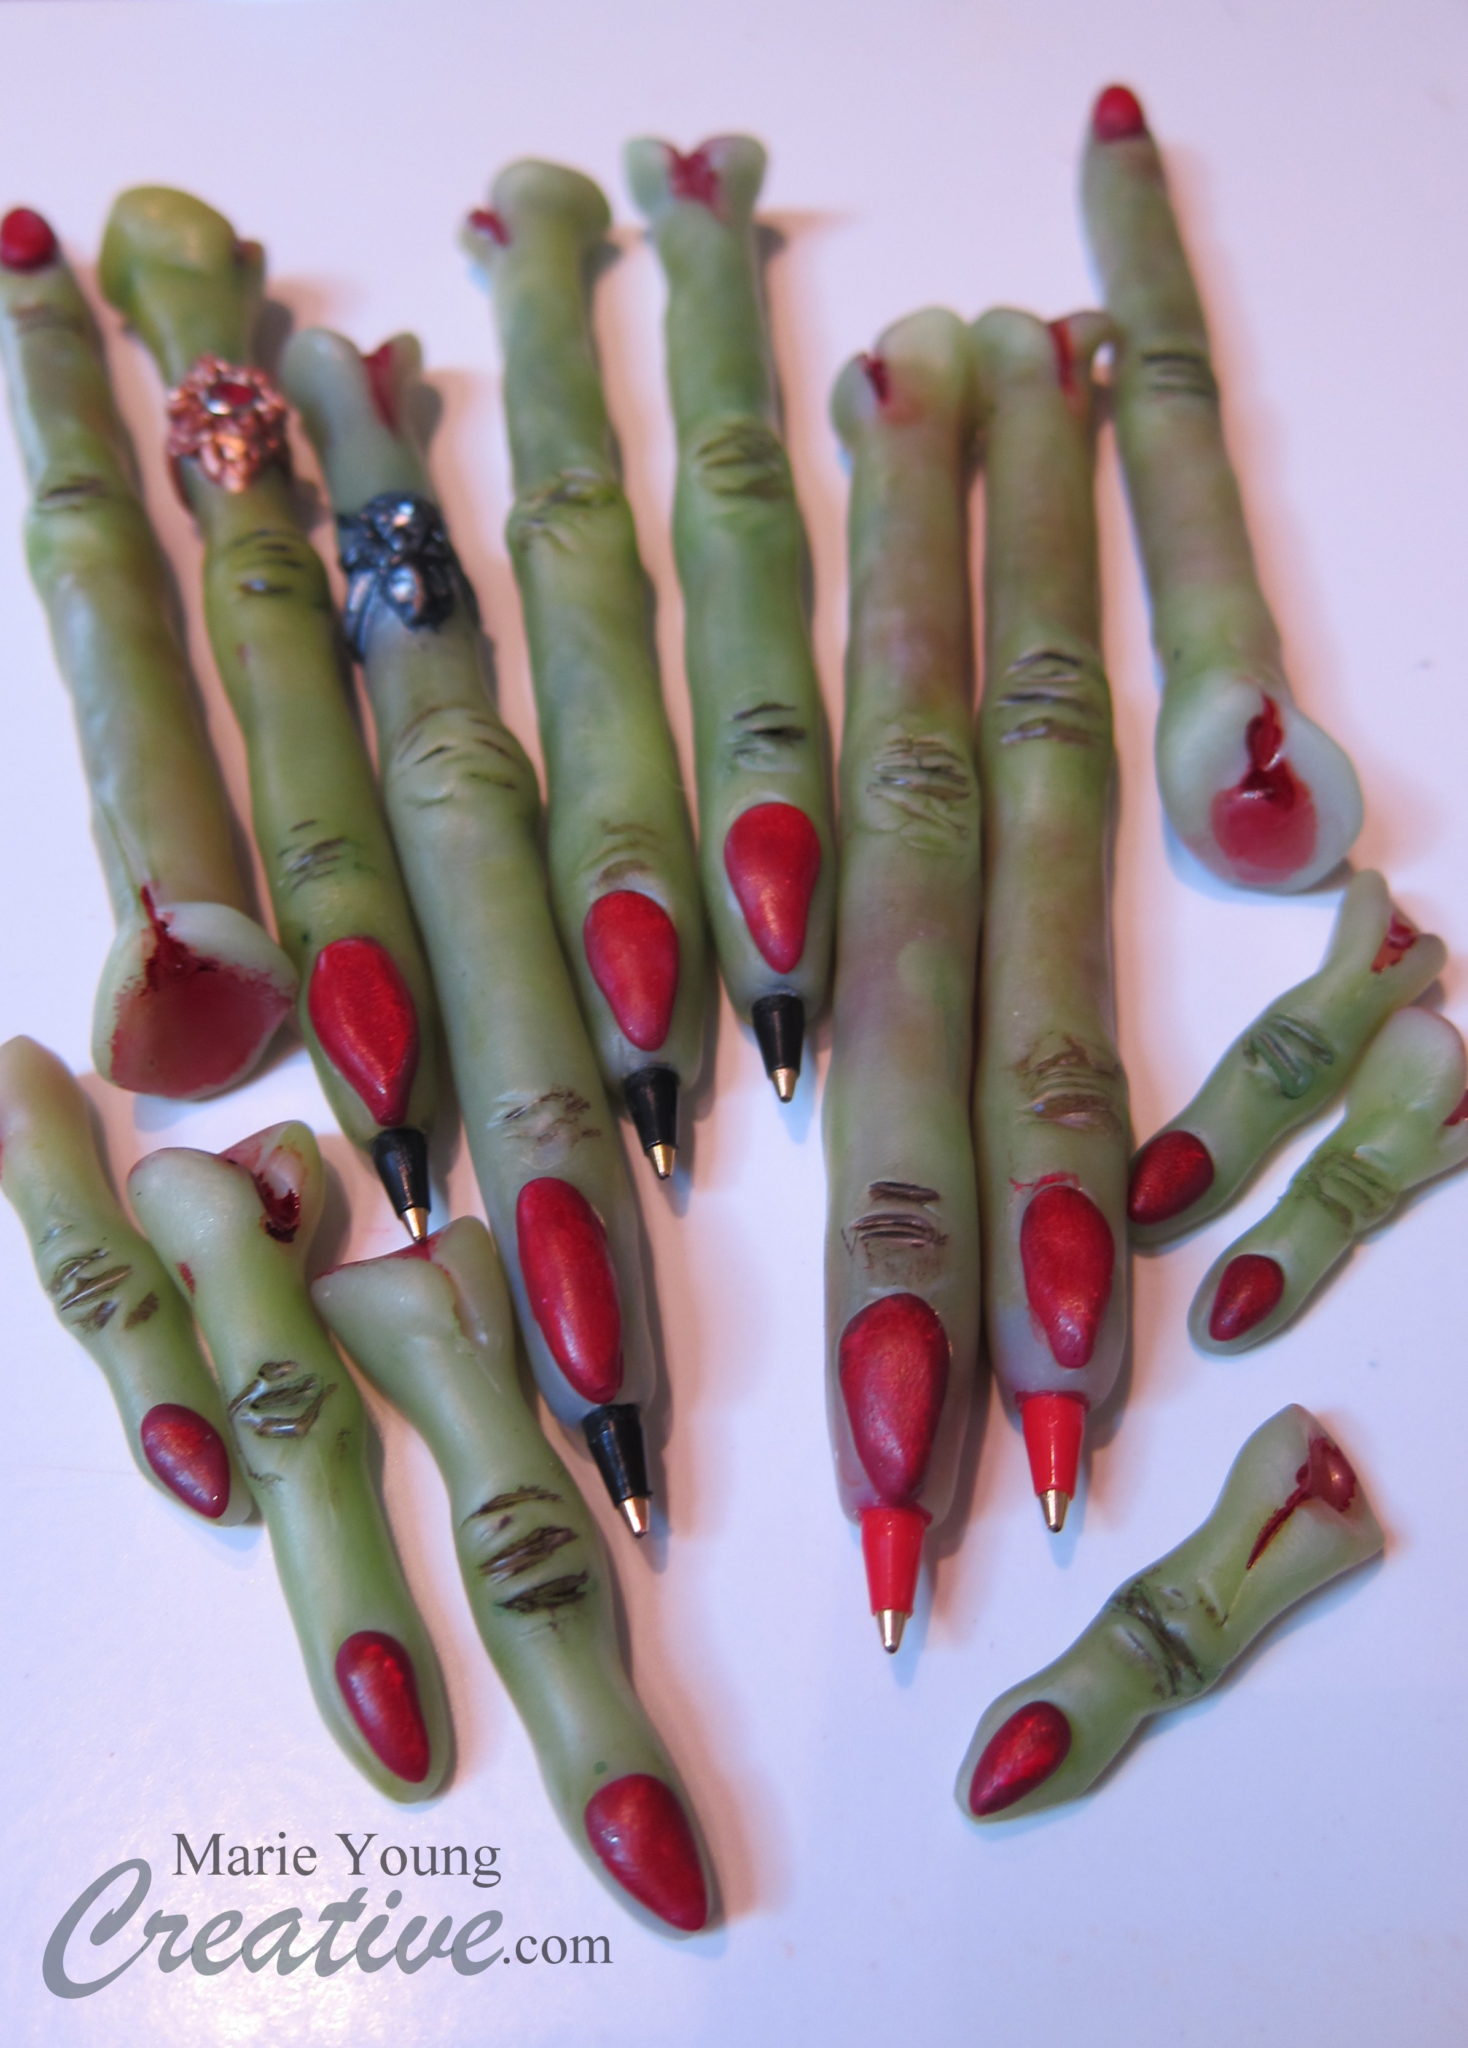 in progress the Marie Young Creative 2013 witch finger collection